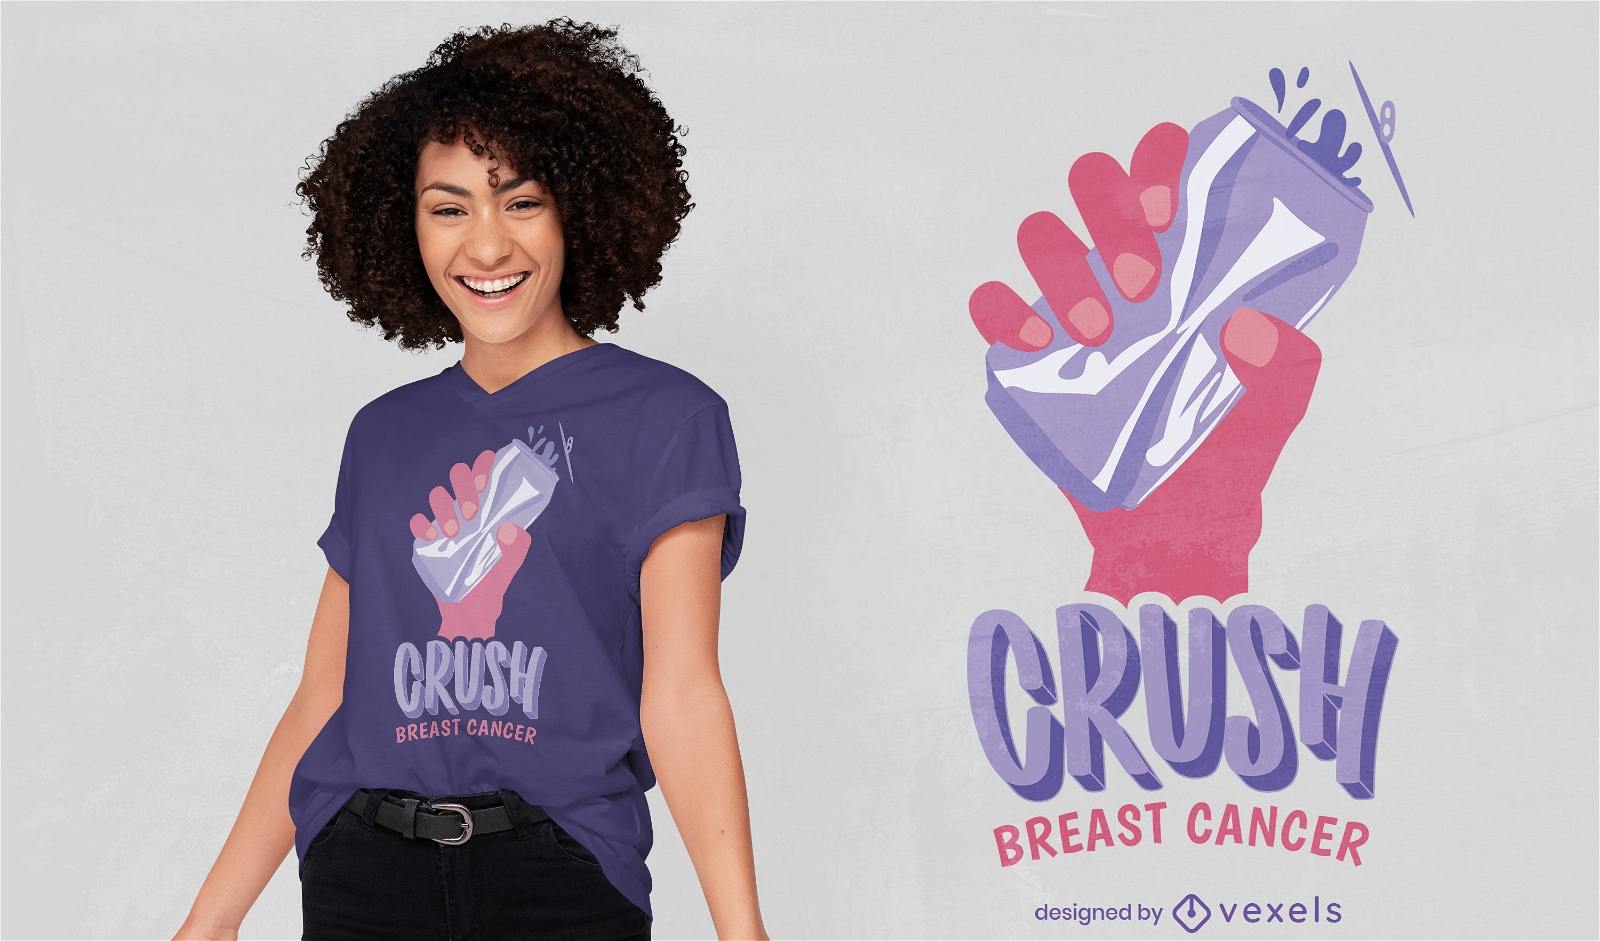 Crush breast cancer quote t-shirt design